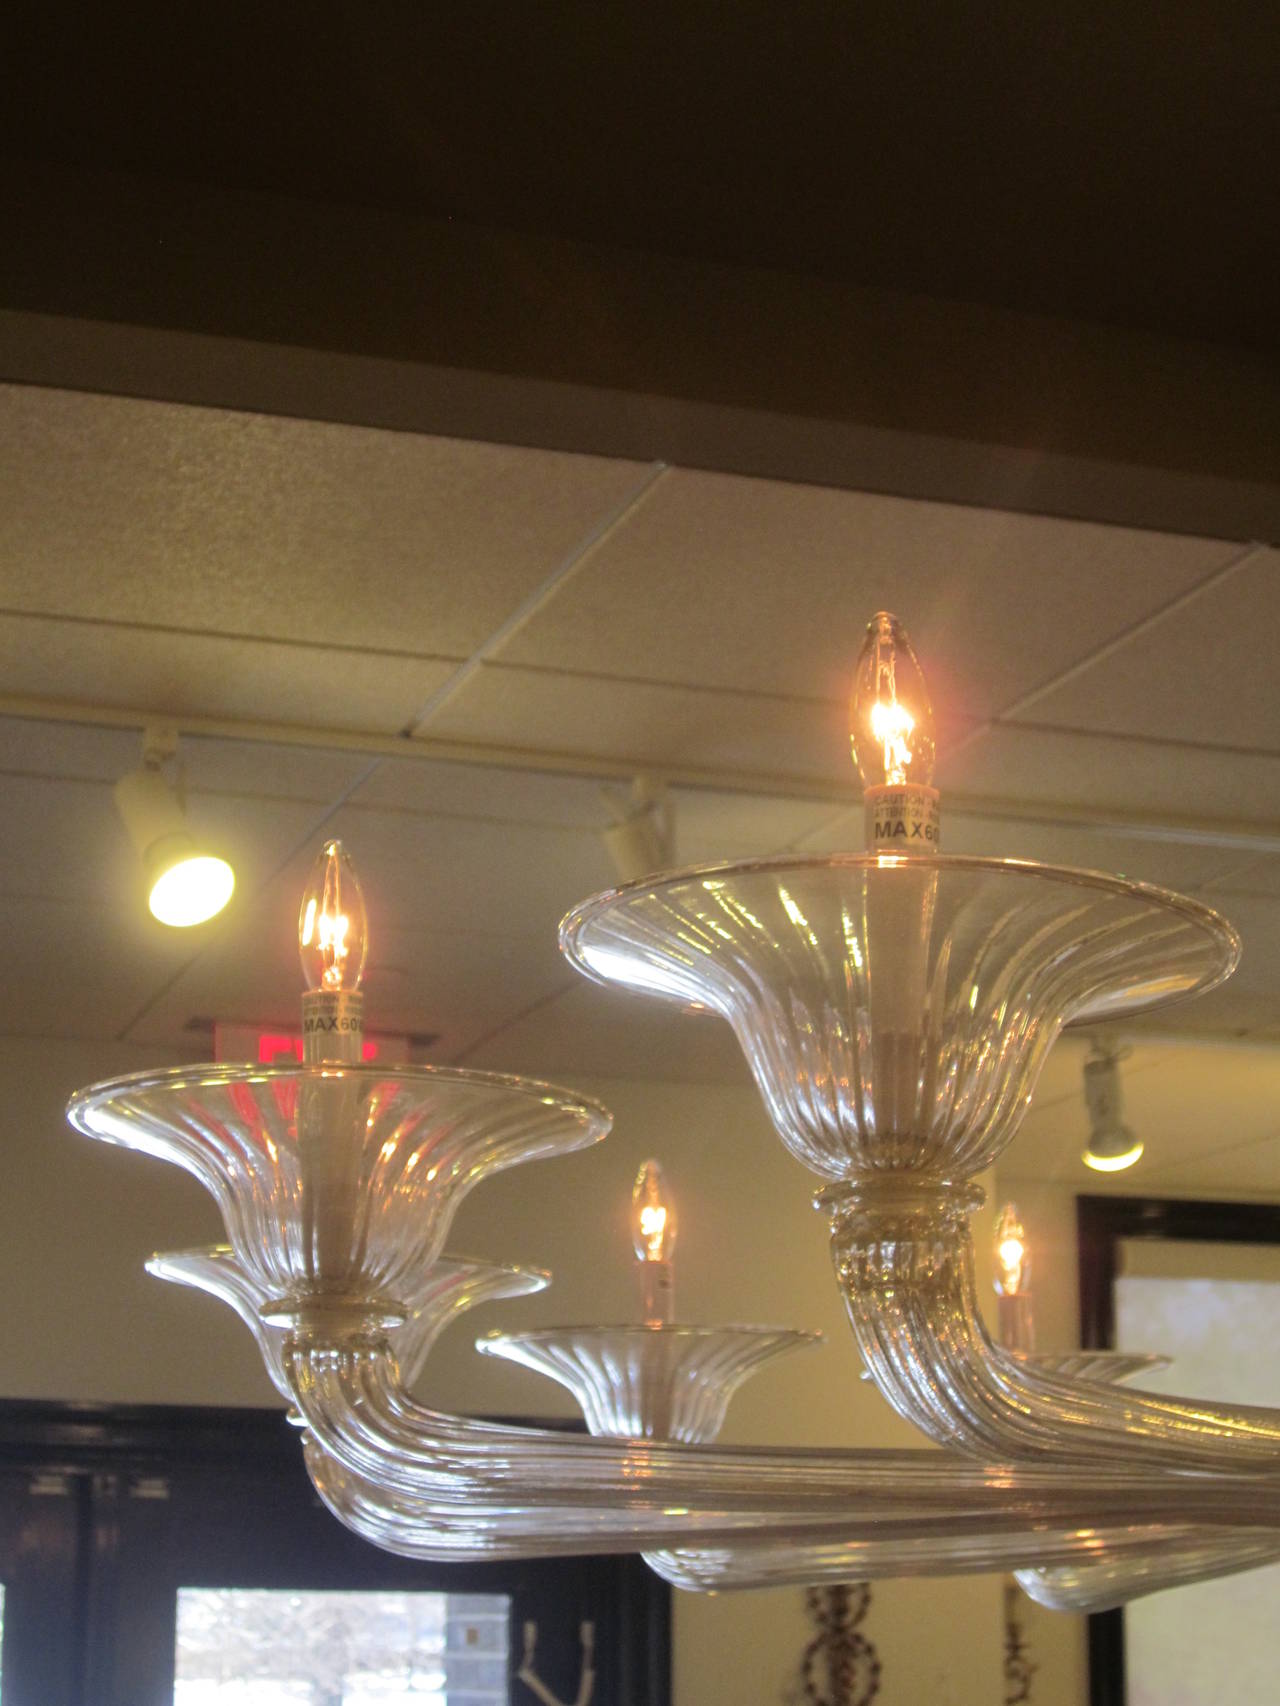 Elegant, very large handblown Mid-Century Modern style Venetian glass chandelier and pendant with twelve arms arranged in a sober pattern around a central bowl. The handblown glass is clear interspersed with flecks of gold leaf. 

The height is